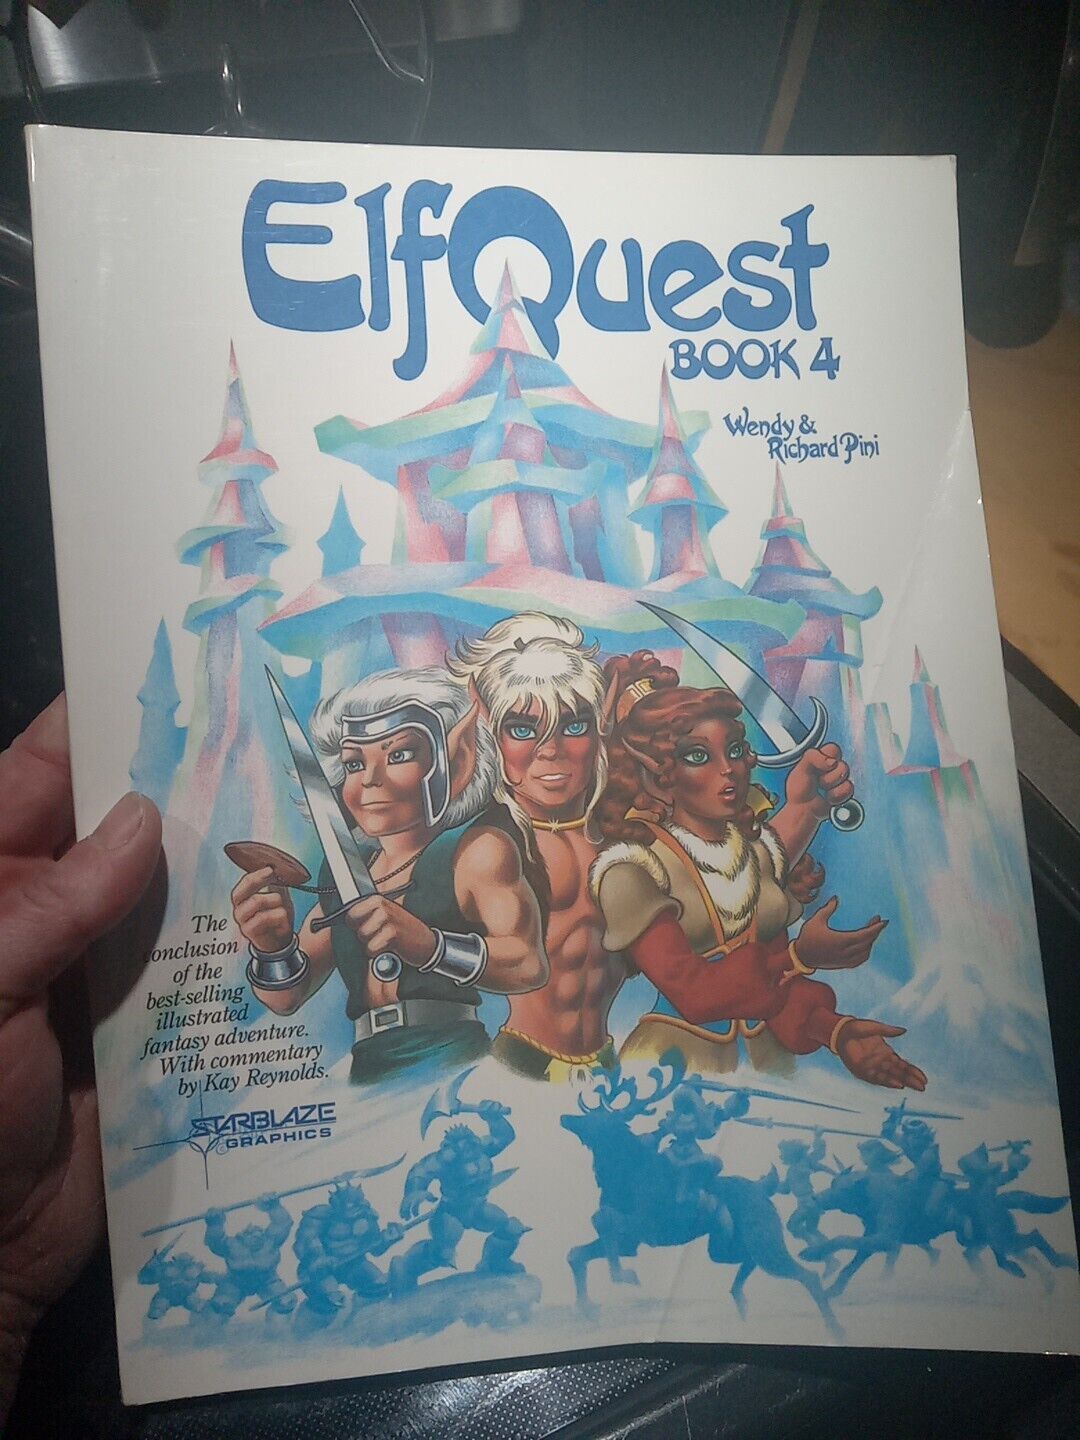 ElfQuest Book 4 1st Edition- Donning Company, 1984 Graphic Novel